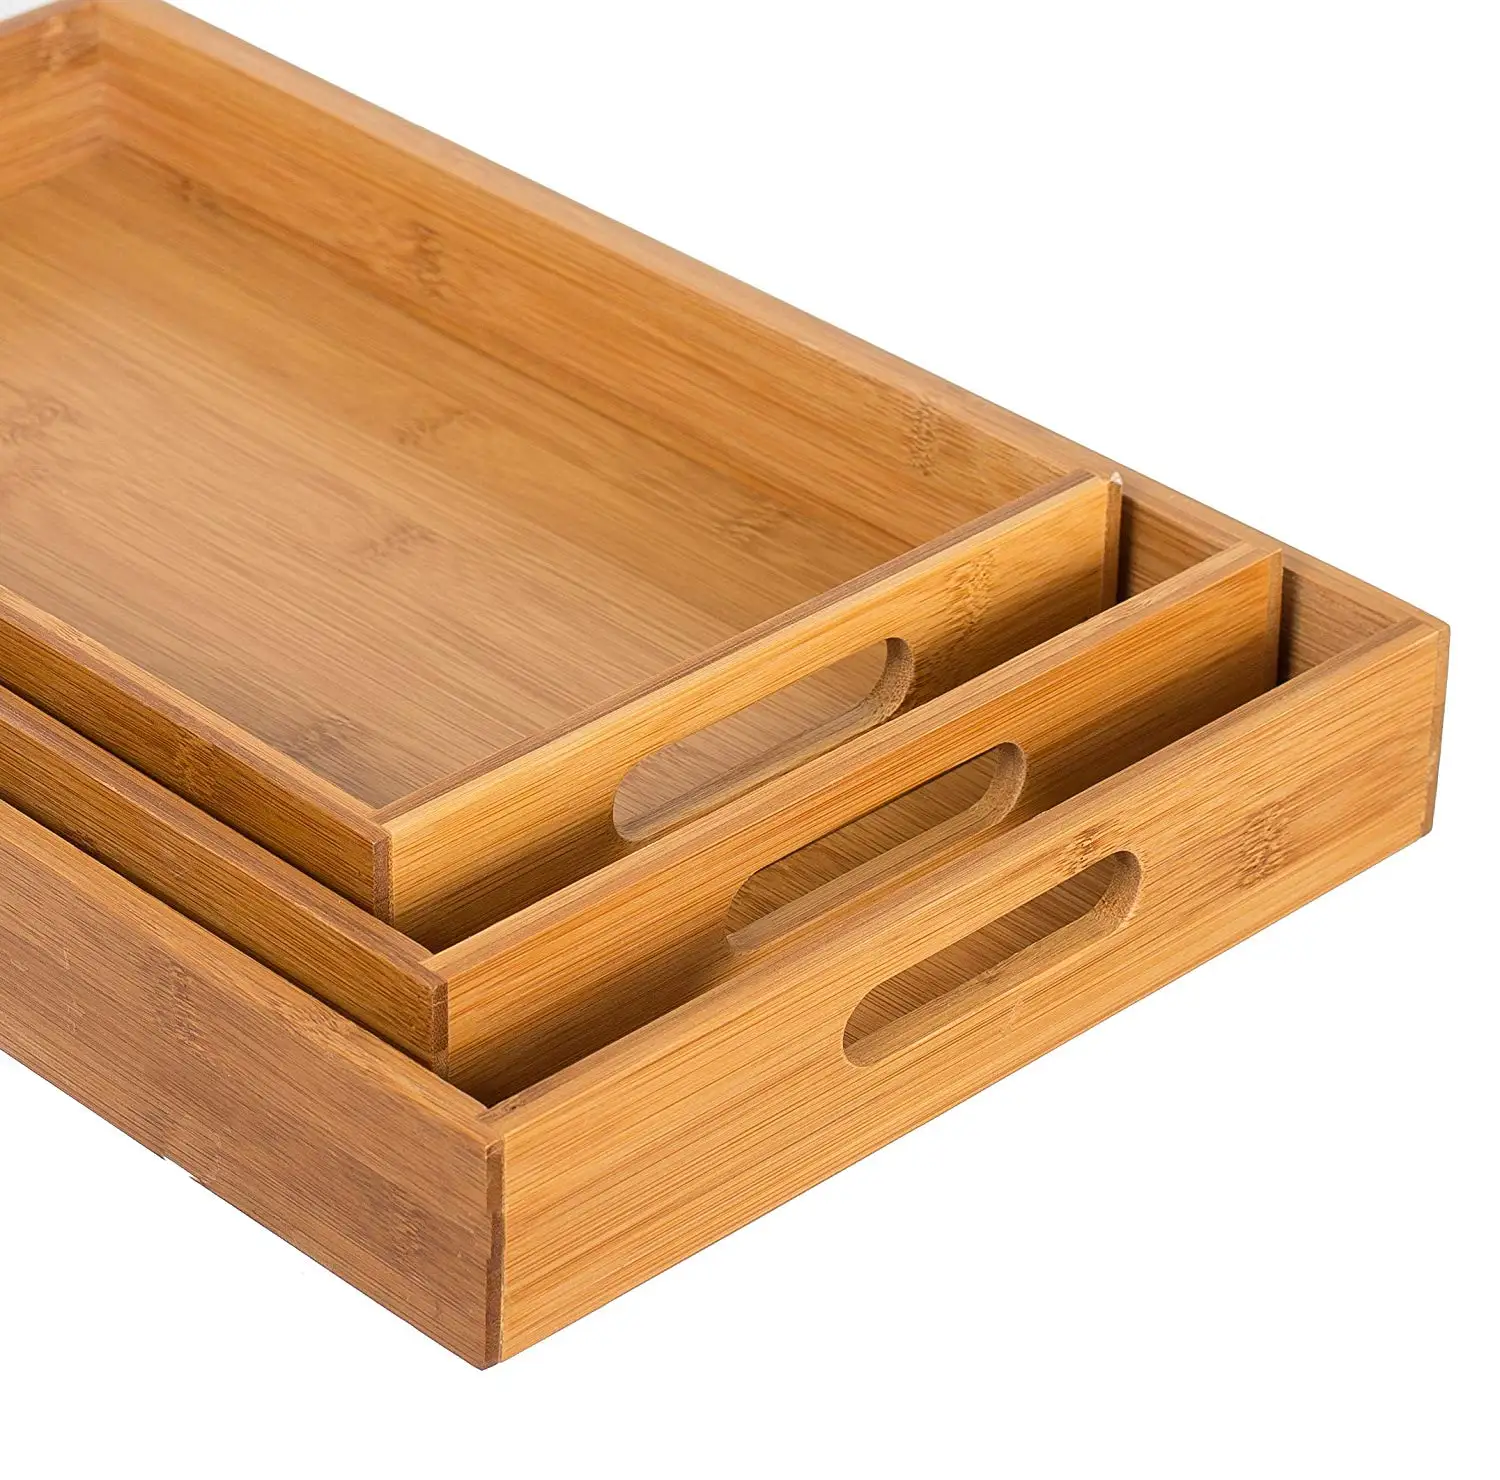 Reliable And Cheap Wooden Food Serving Tray Breakfast Tray - Buy Wooden